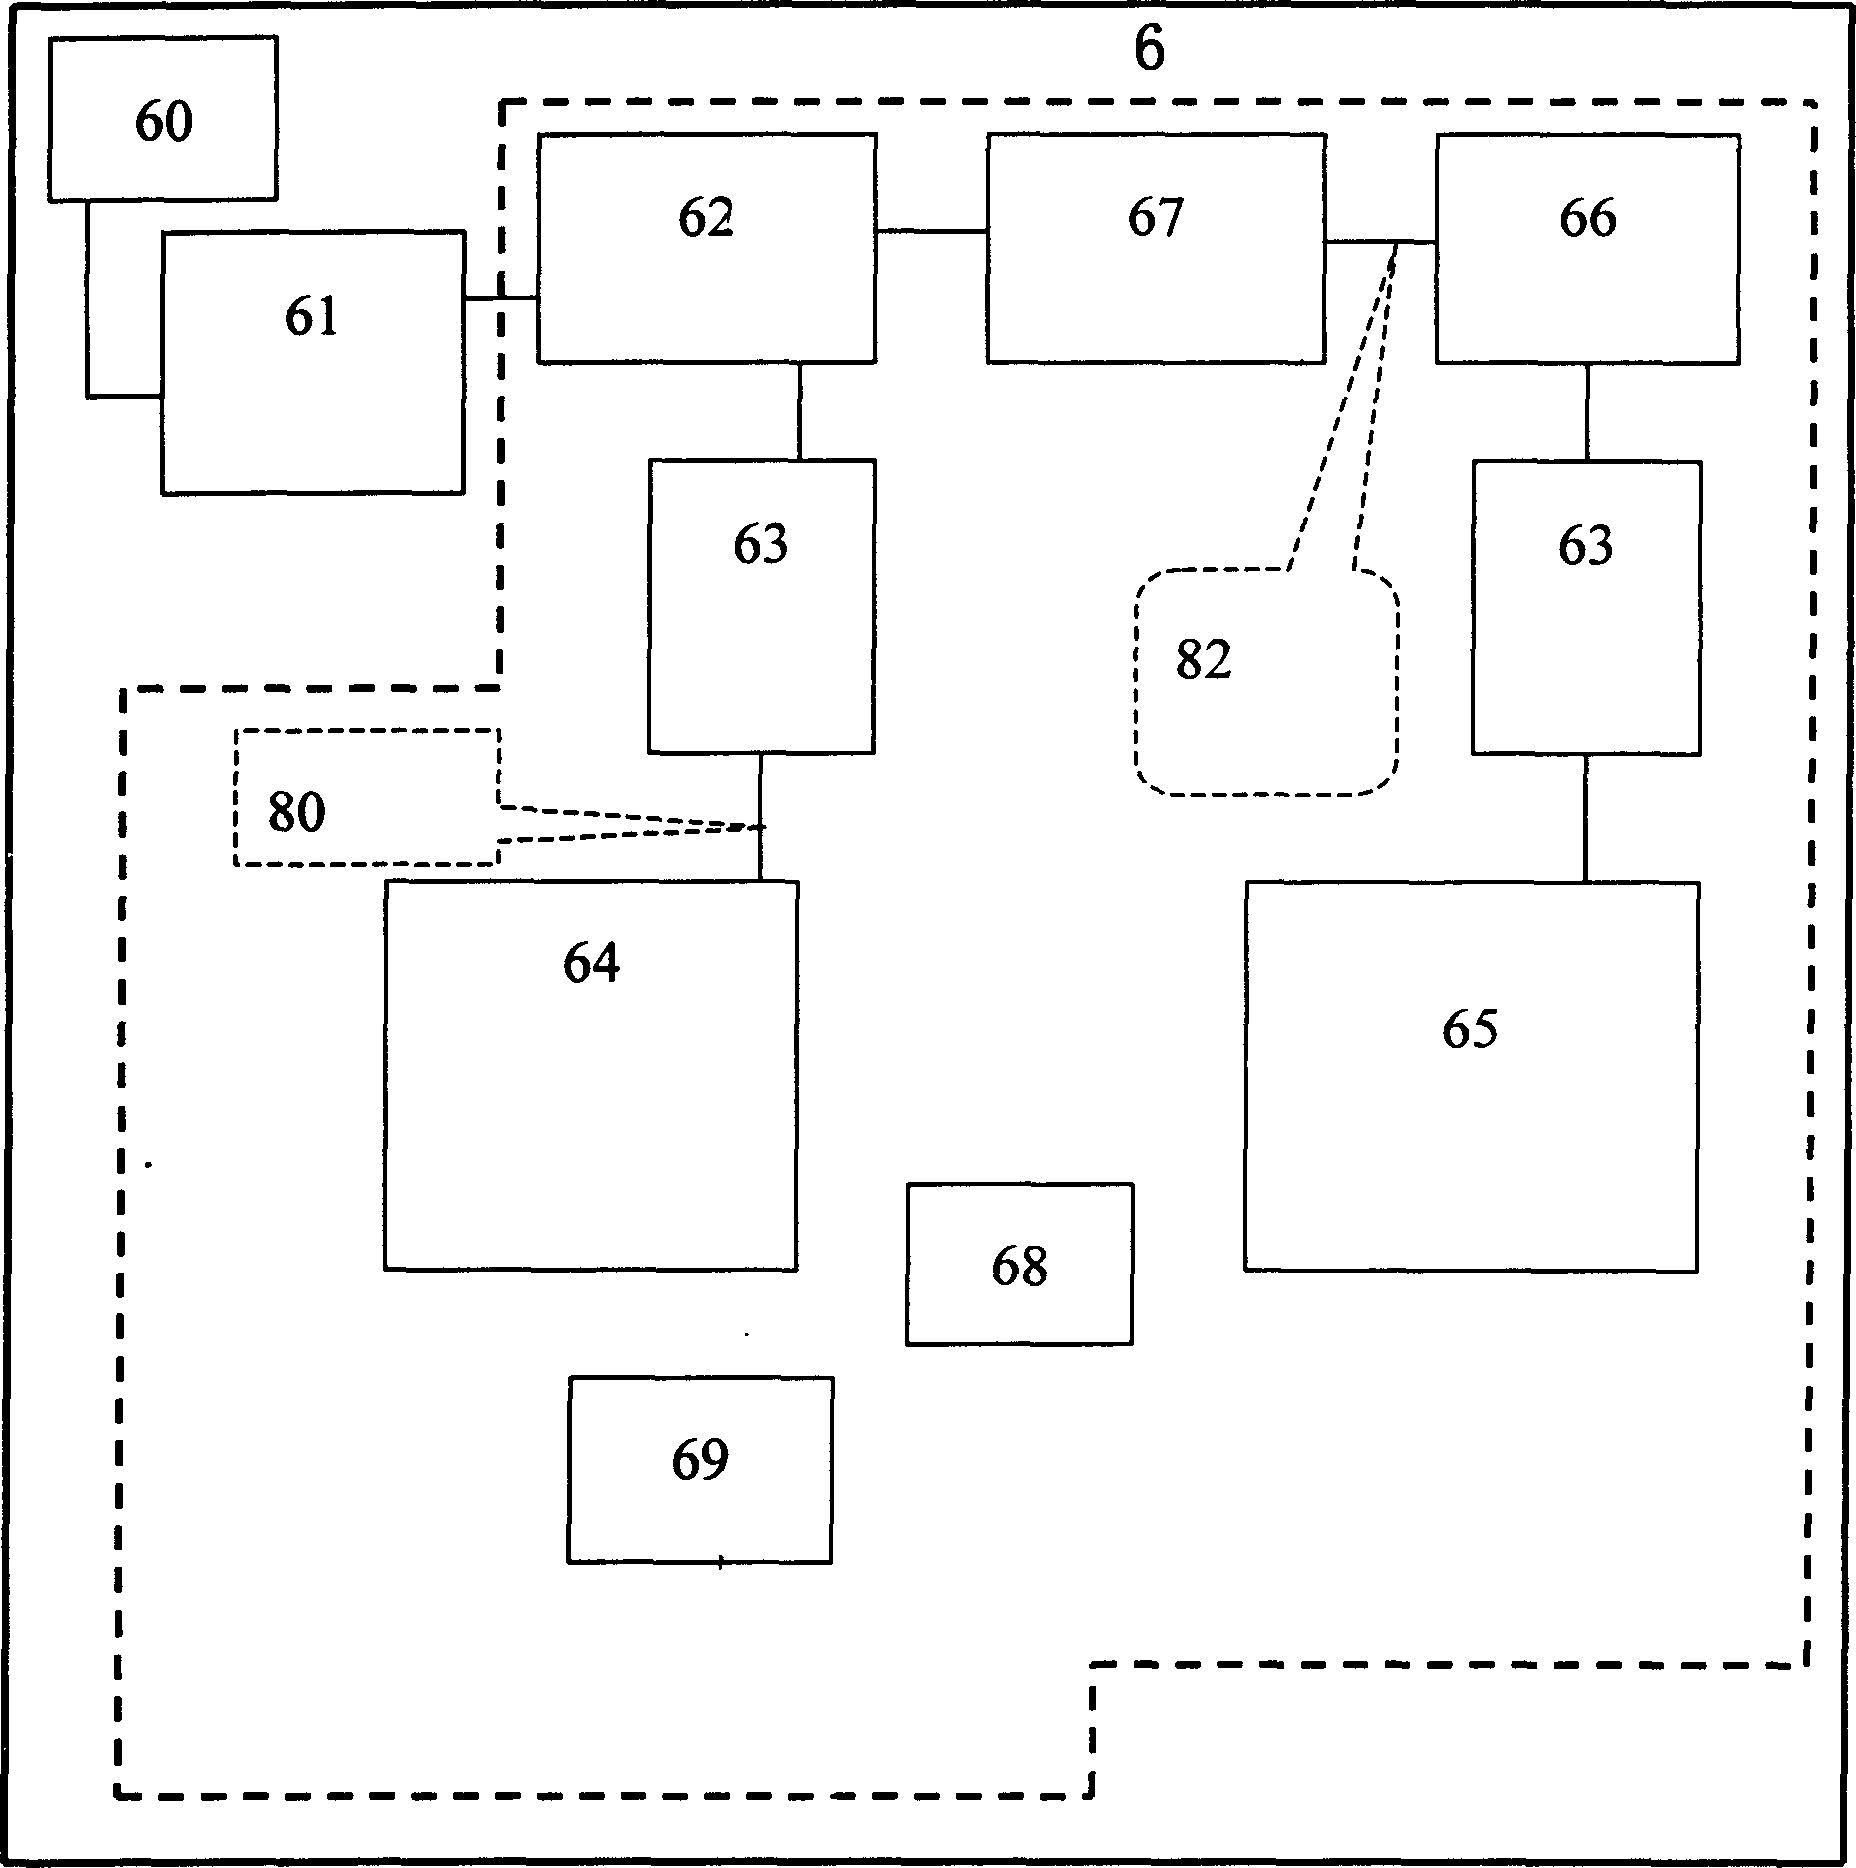 TD-SCDMA mobile phone circuit board for implementing eftective integral distribution